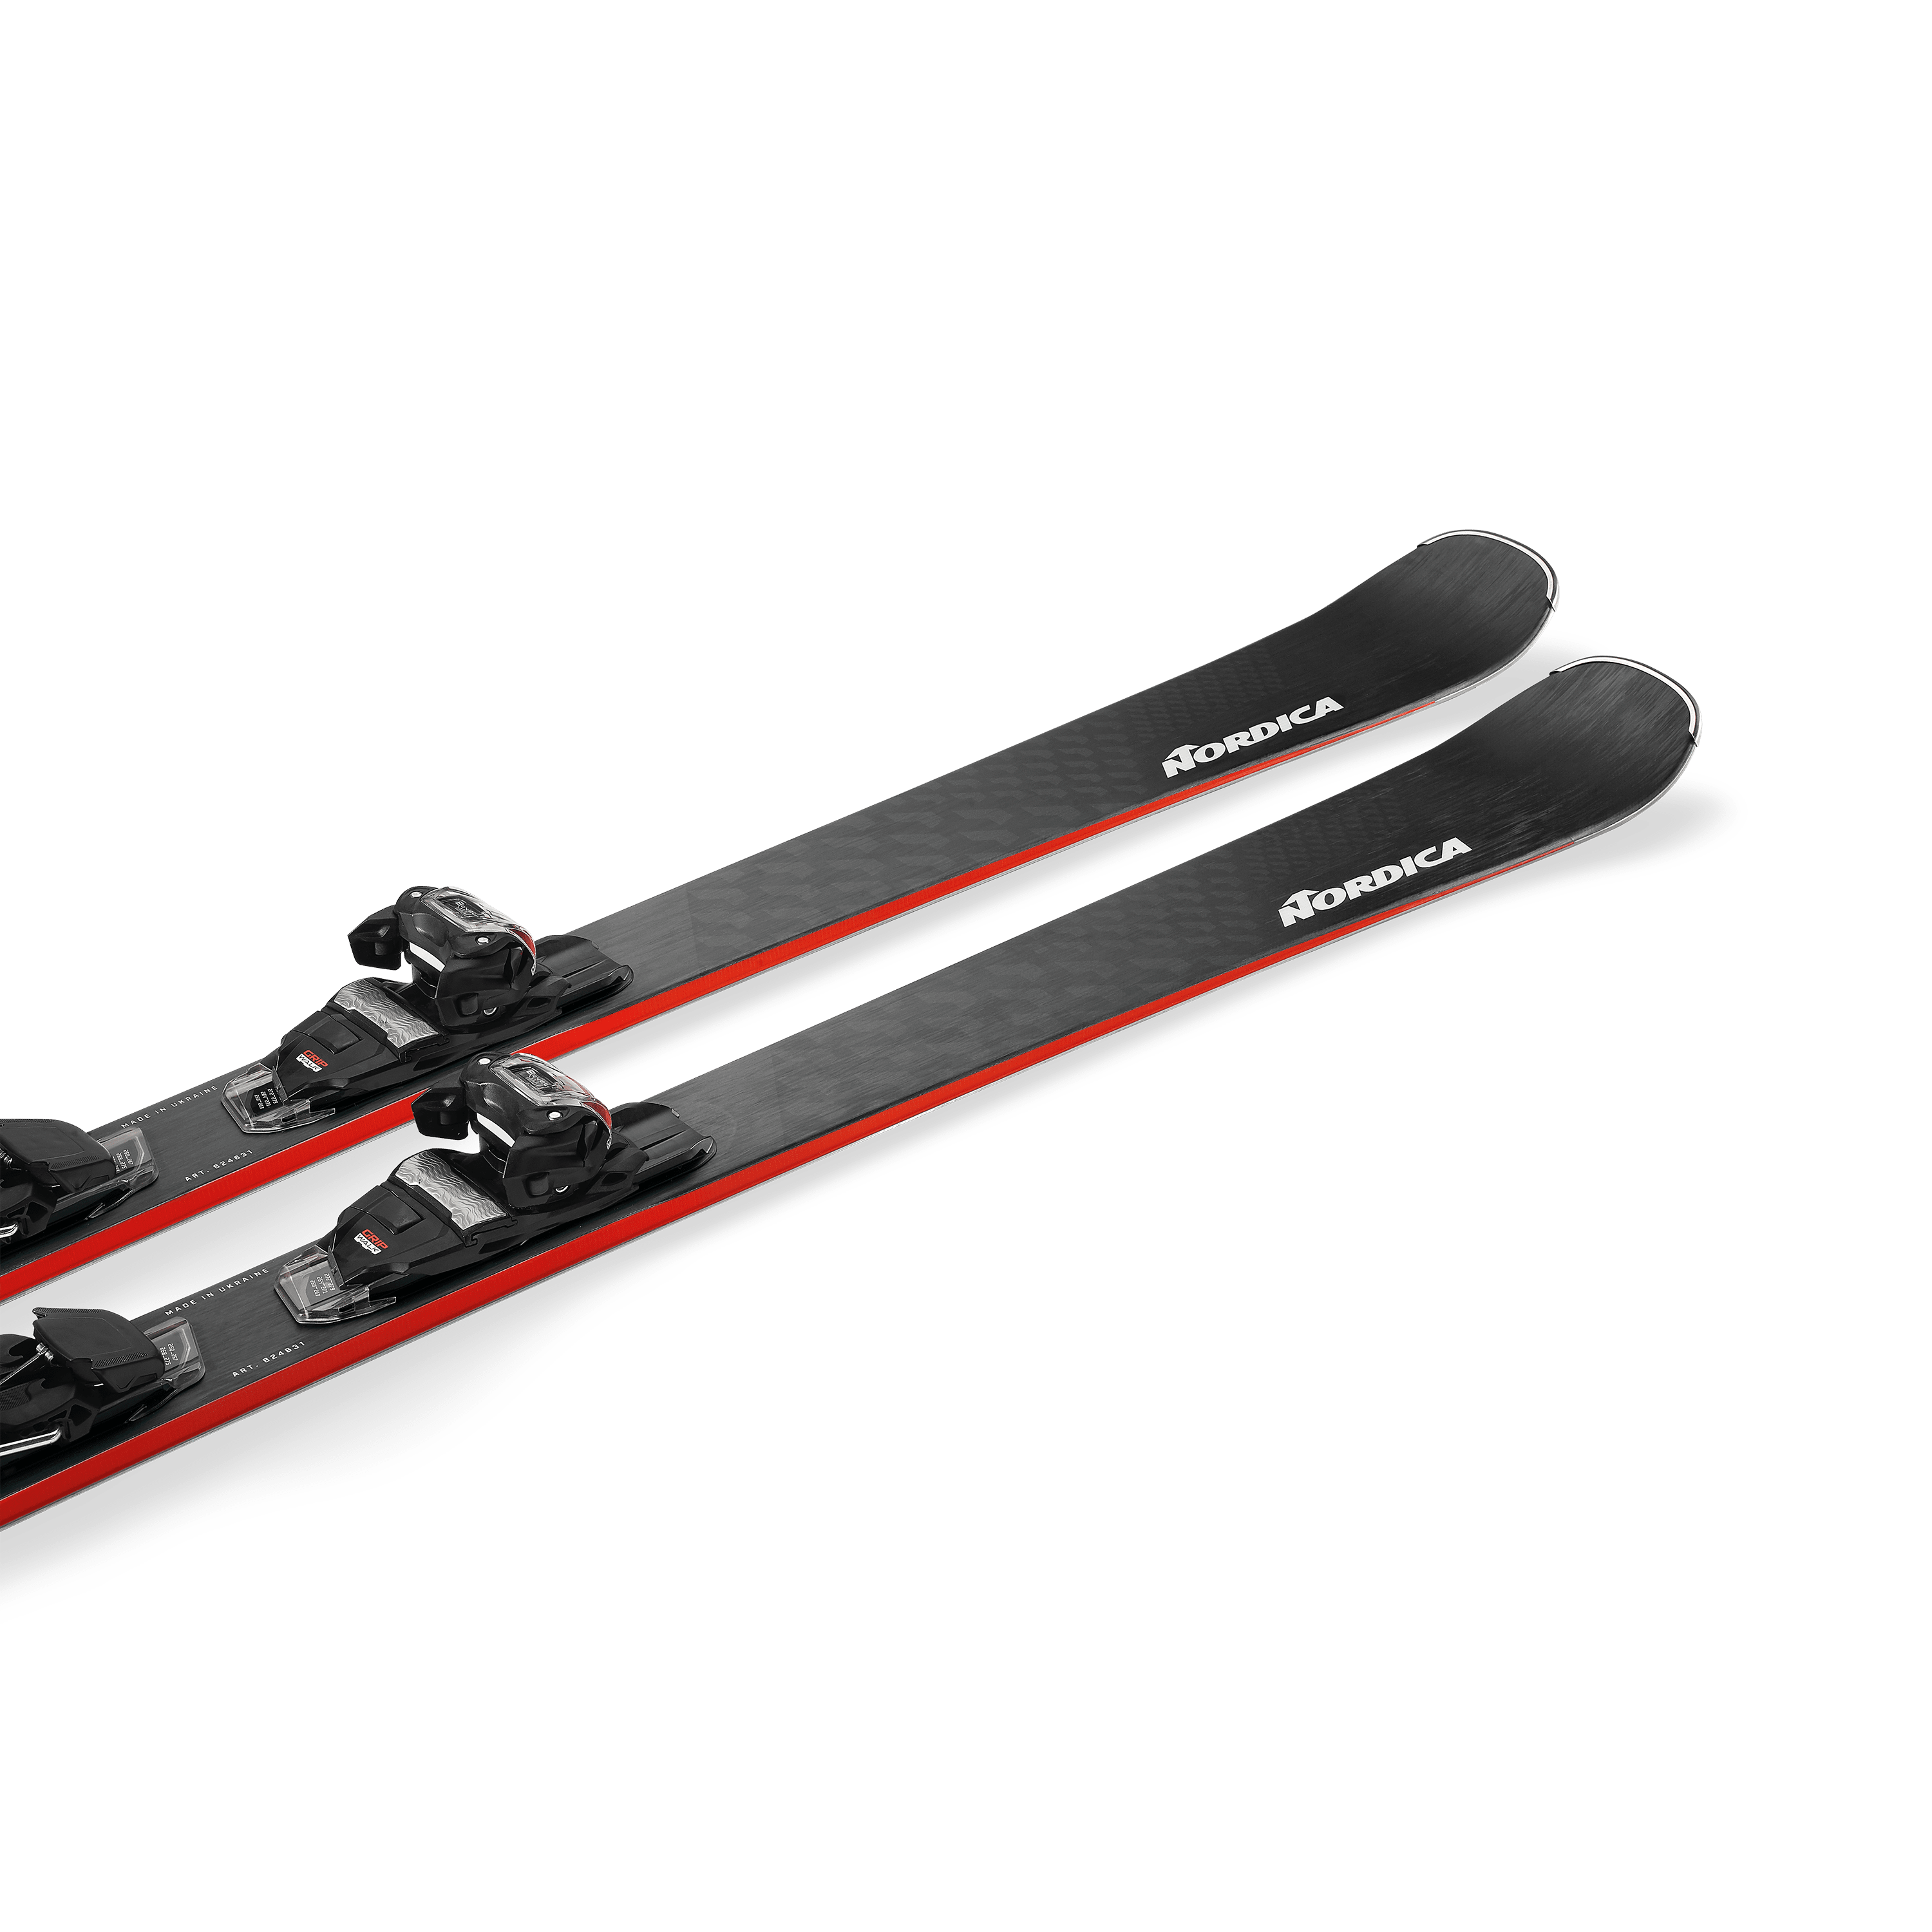 Picture of the Nordica Steadfast 80 ca fdt skis.